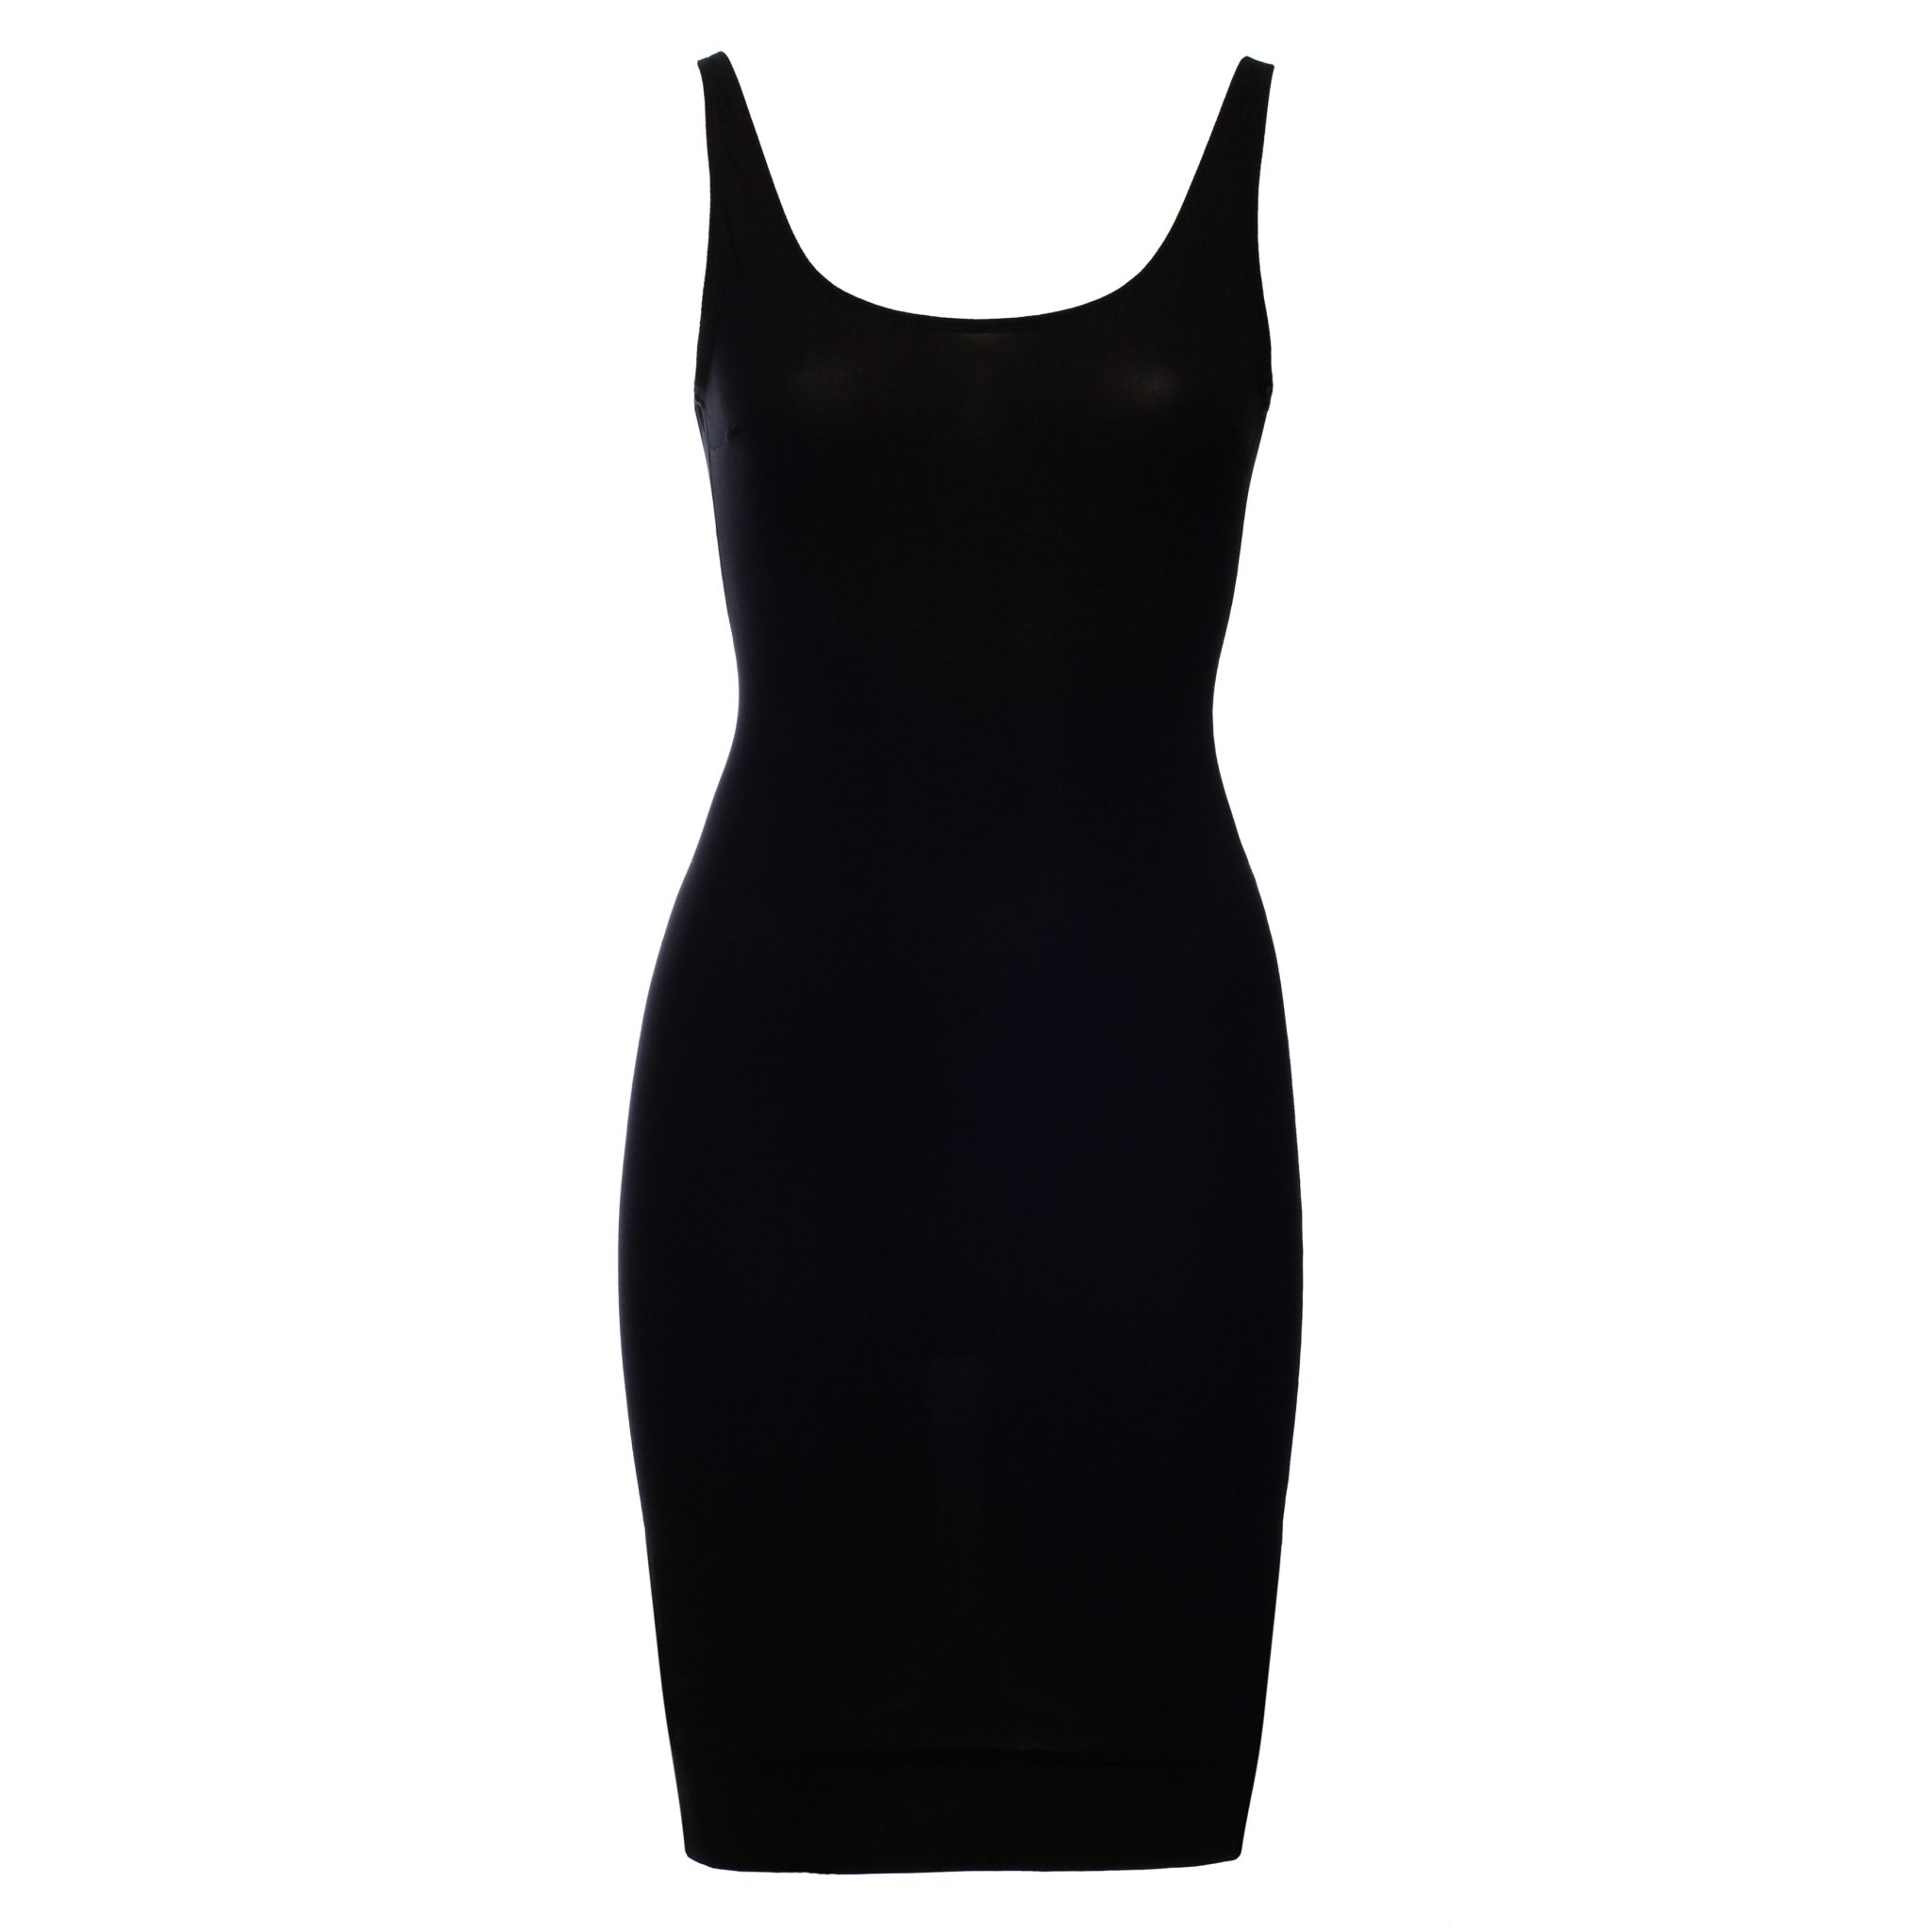 Black Jersey Underdress by Flash You and Me